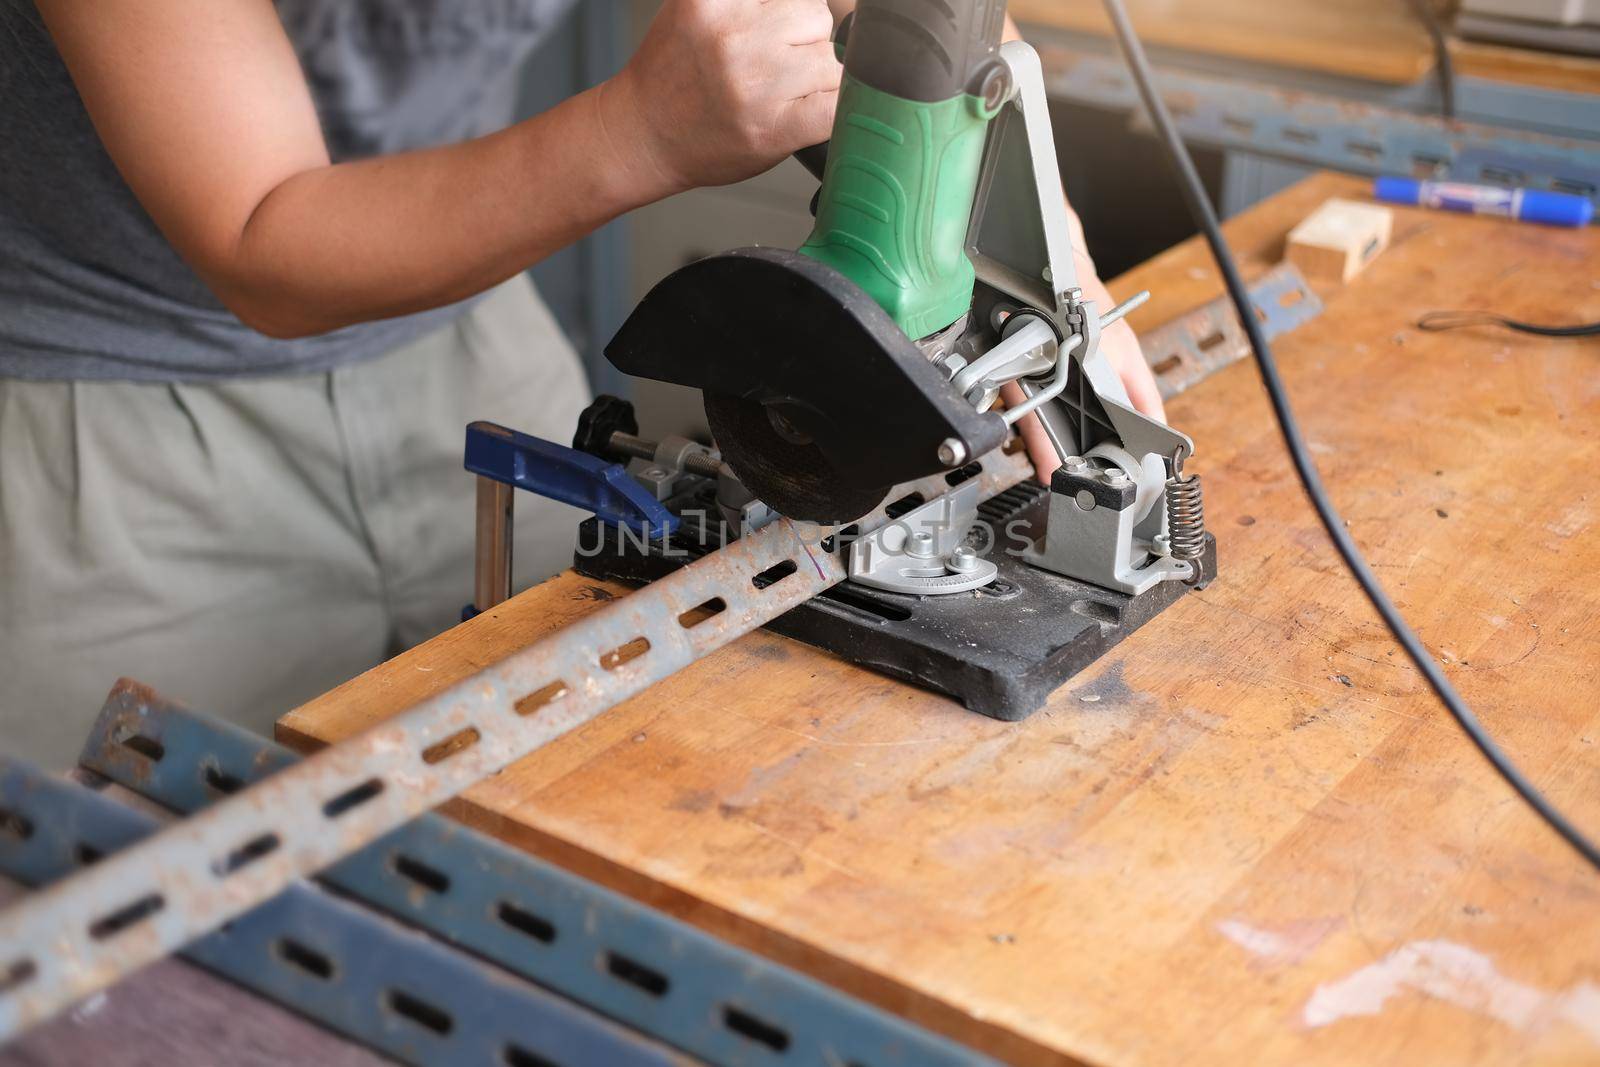 Craftsmen use iron cutters to assemble DIY projects during the holidays by Manastrong